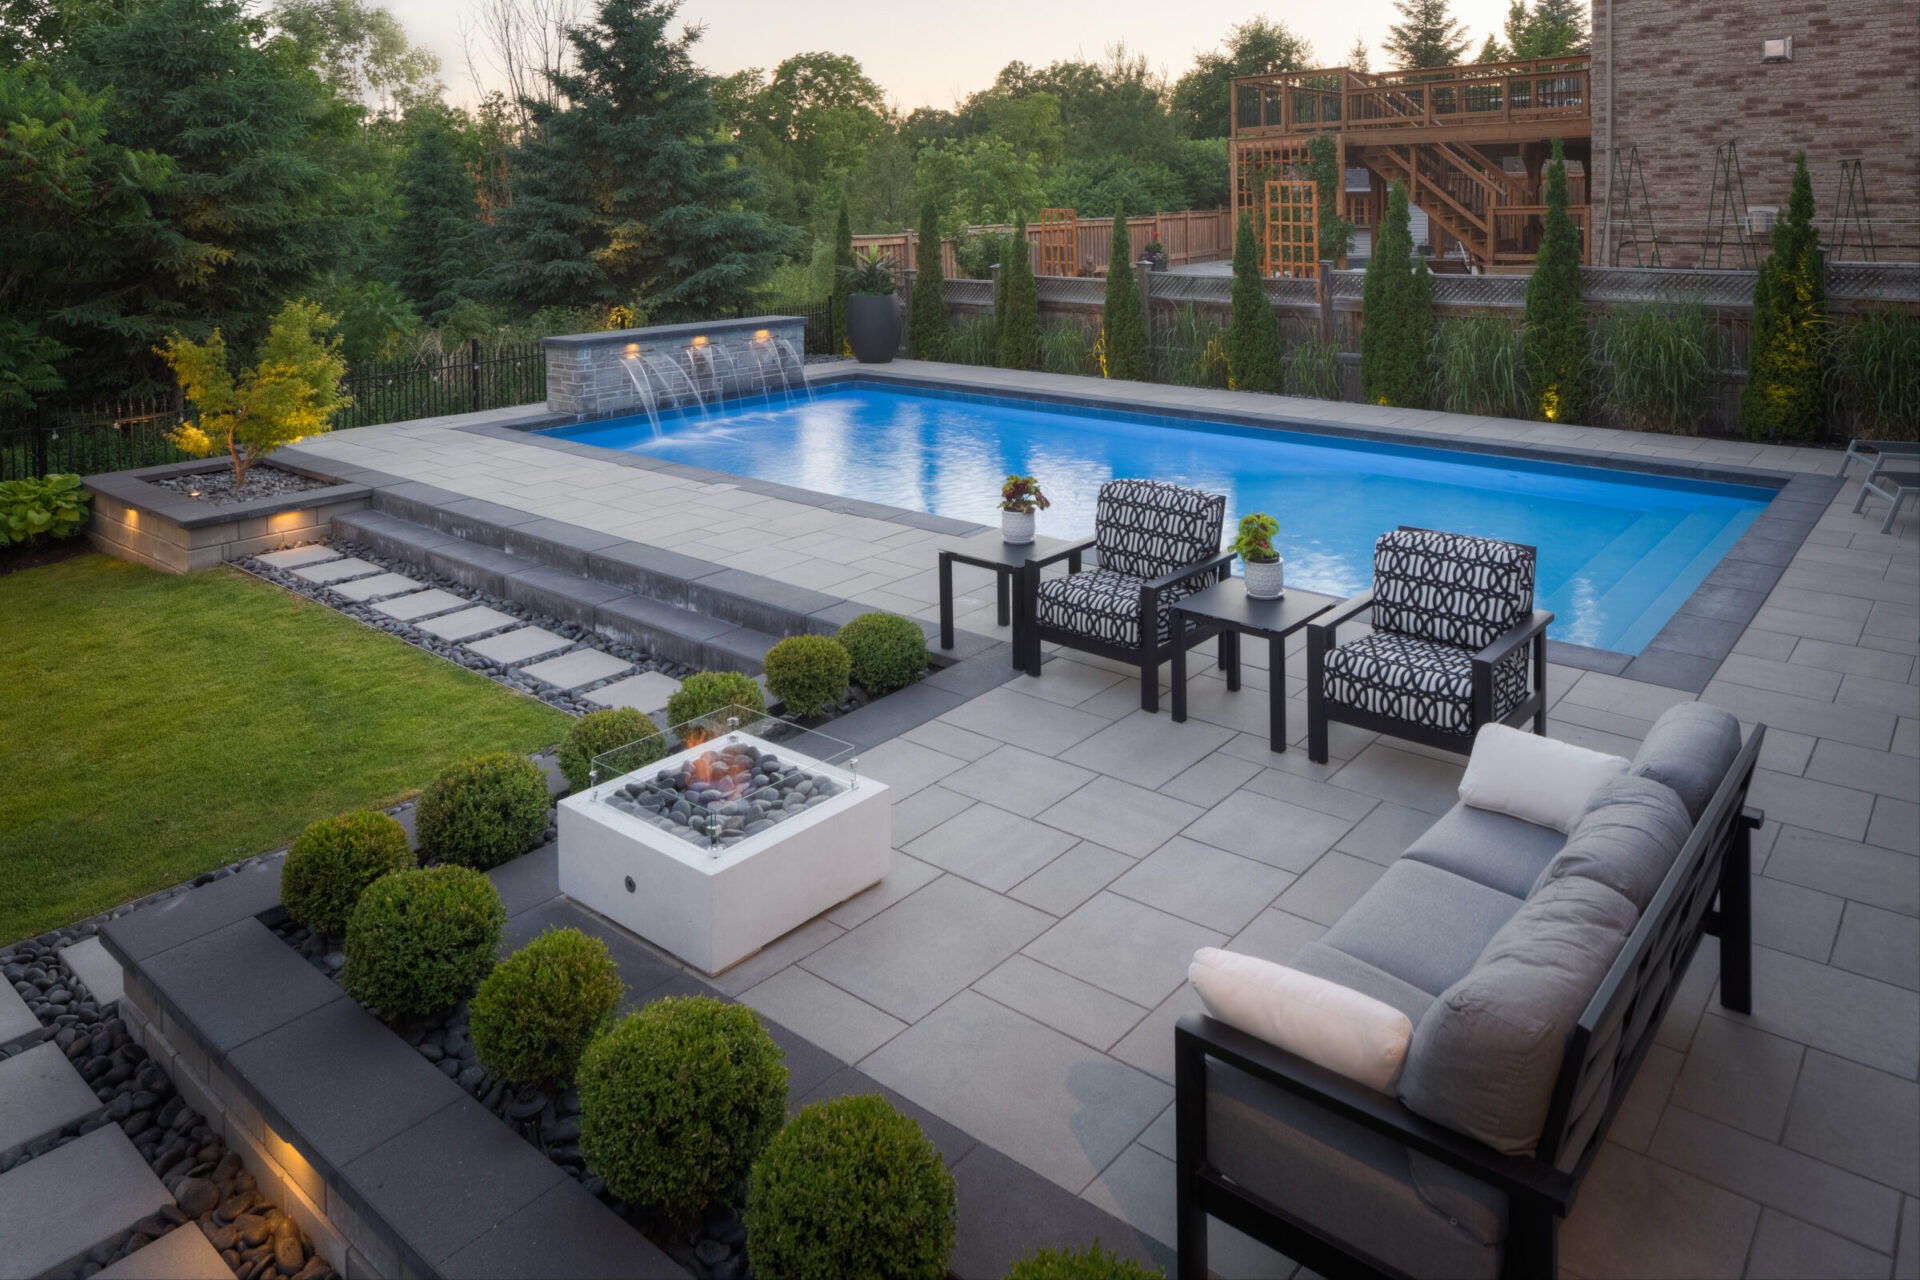 An elegant outdoor area at dusk featuring a large swimming pool, patio furniture, a gas fire pit, well-manicured lawn and landscaping, and a wooden deck.